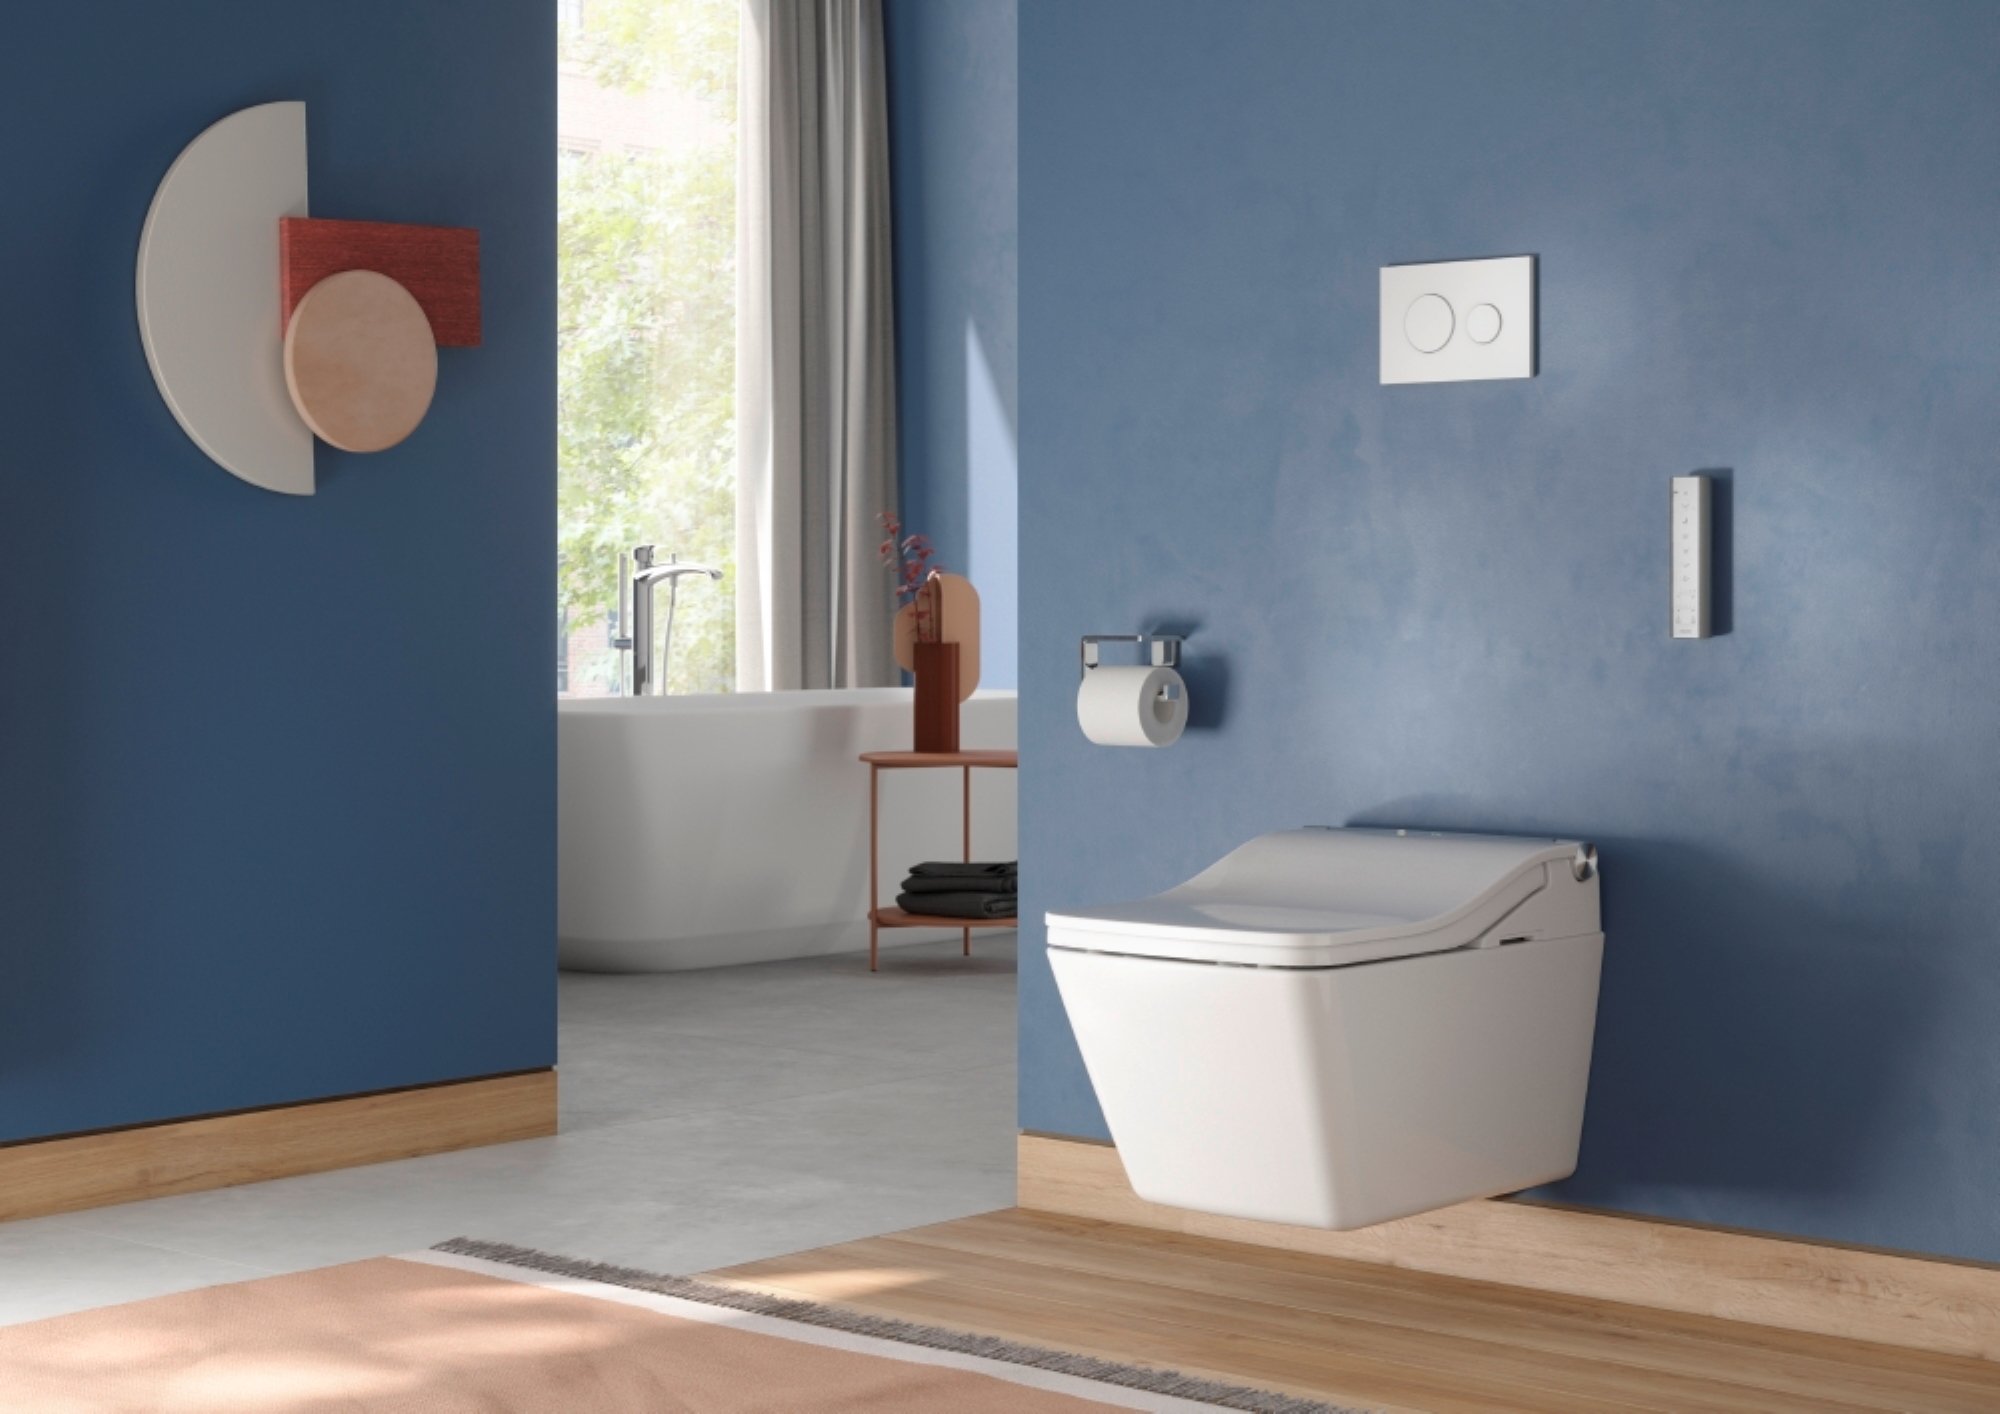 The TOTO Washlet toilet and seat, available at C.P. Hart